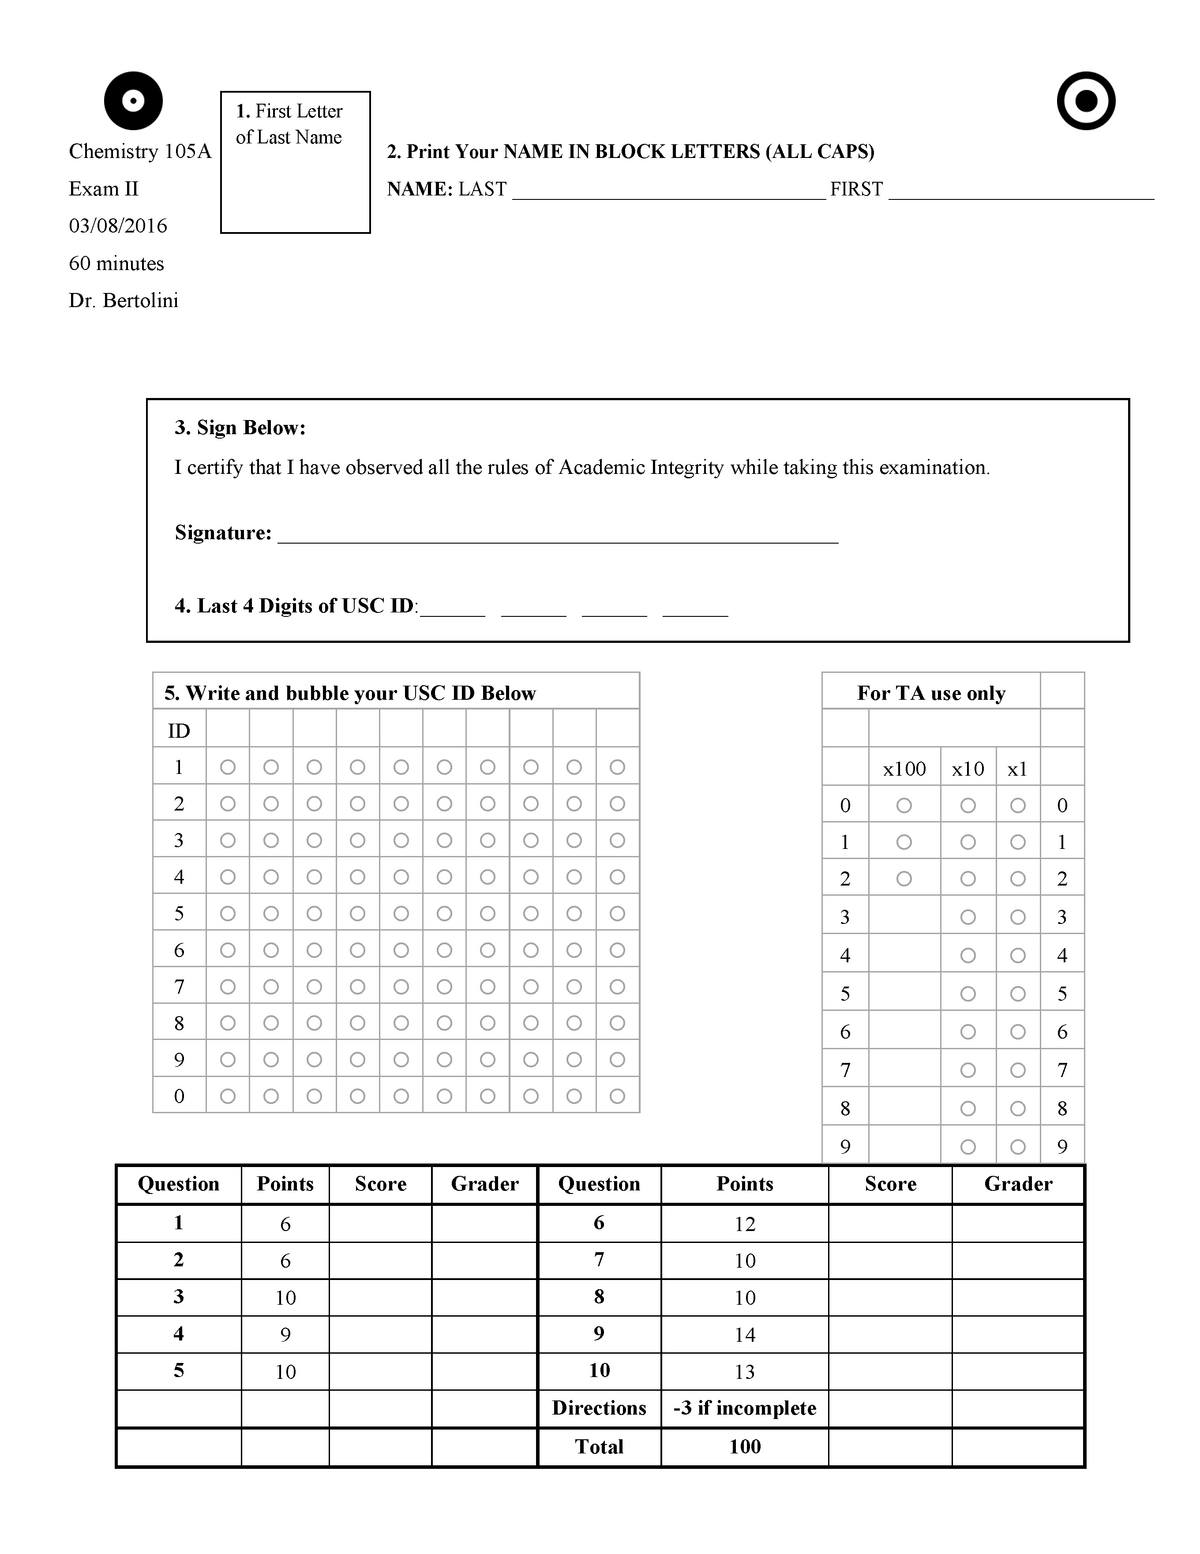 practice-exam-7-chemistry-105a-2-print-your-name-in-block-letters